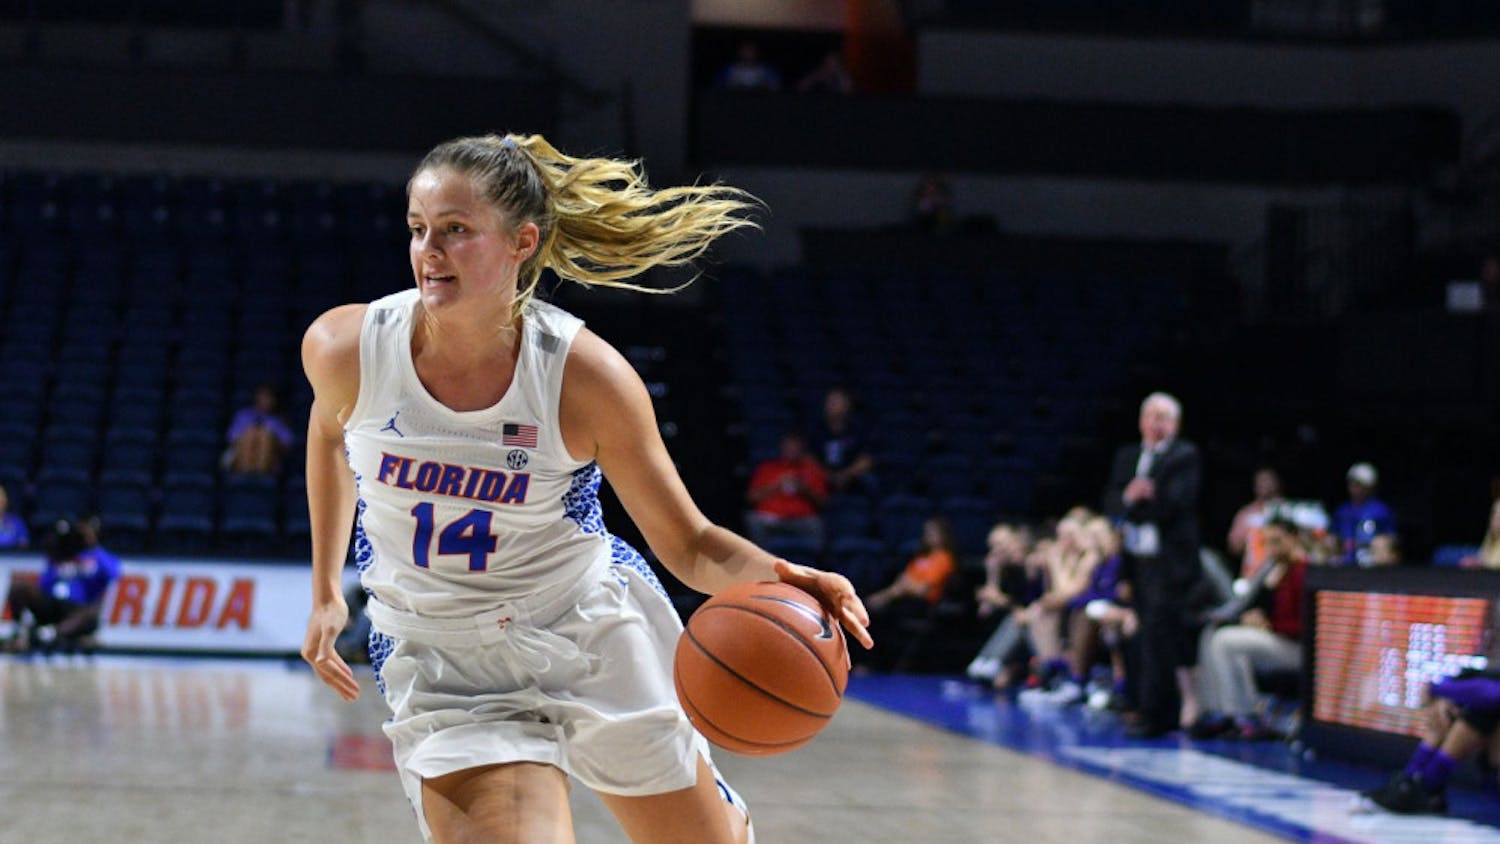 Florida's Kristina Moore returned to the court Sunday for the first time since Nov. 19.